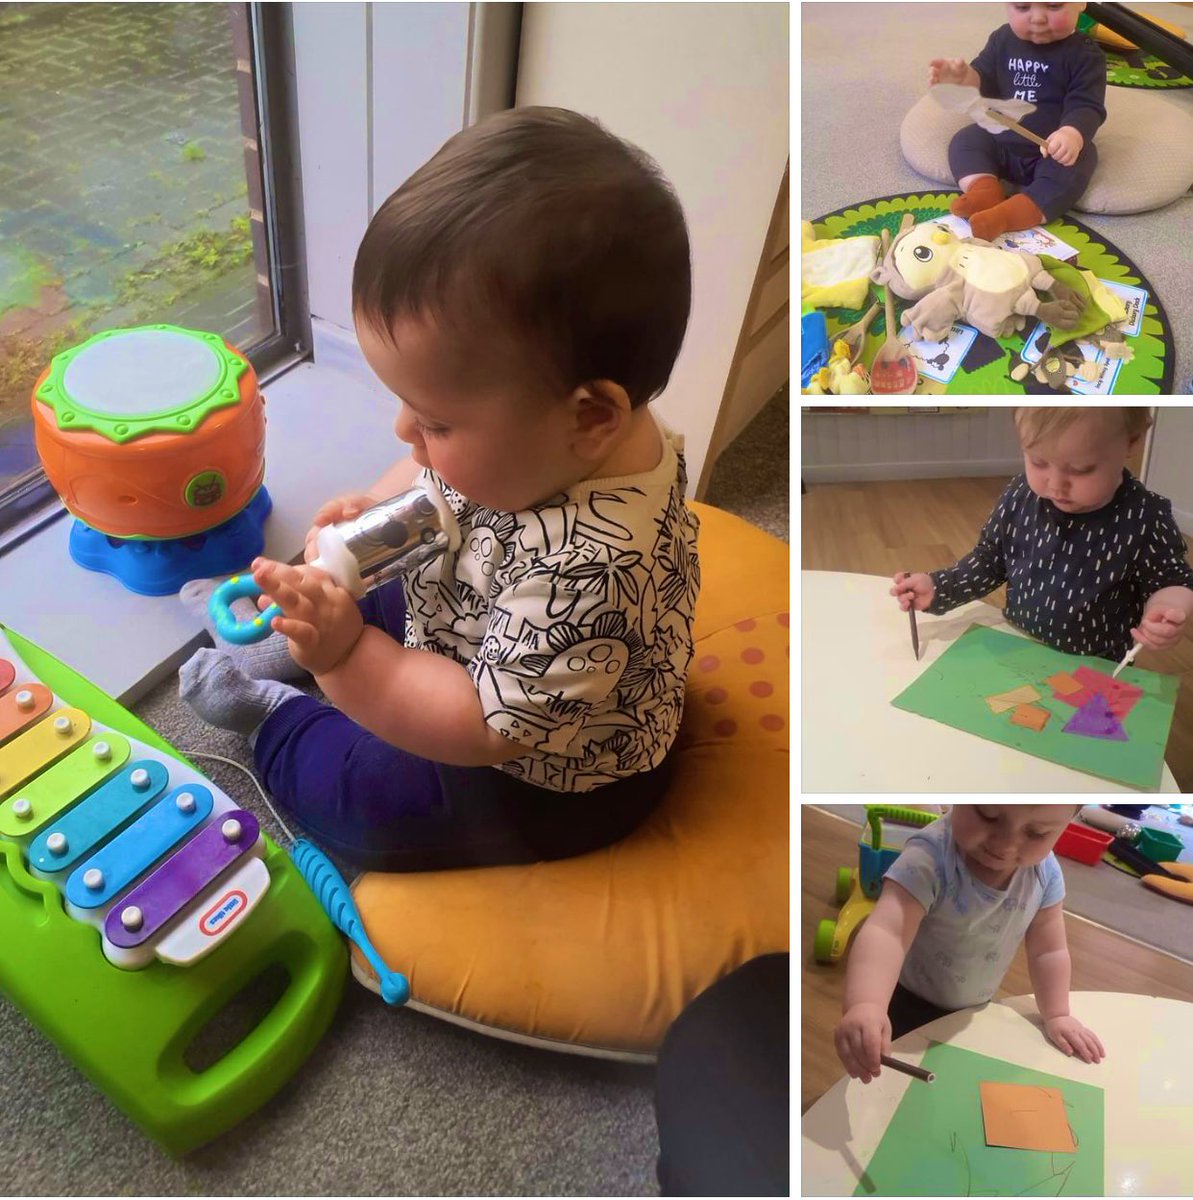 Last week, the babies enjoyed the array of activities they were offered by the team who knew them, their interests and their learning needs well 🌈

#EYFS #sensoryplay #exploring #planning #finemotorskills #warrington #northwich